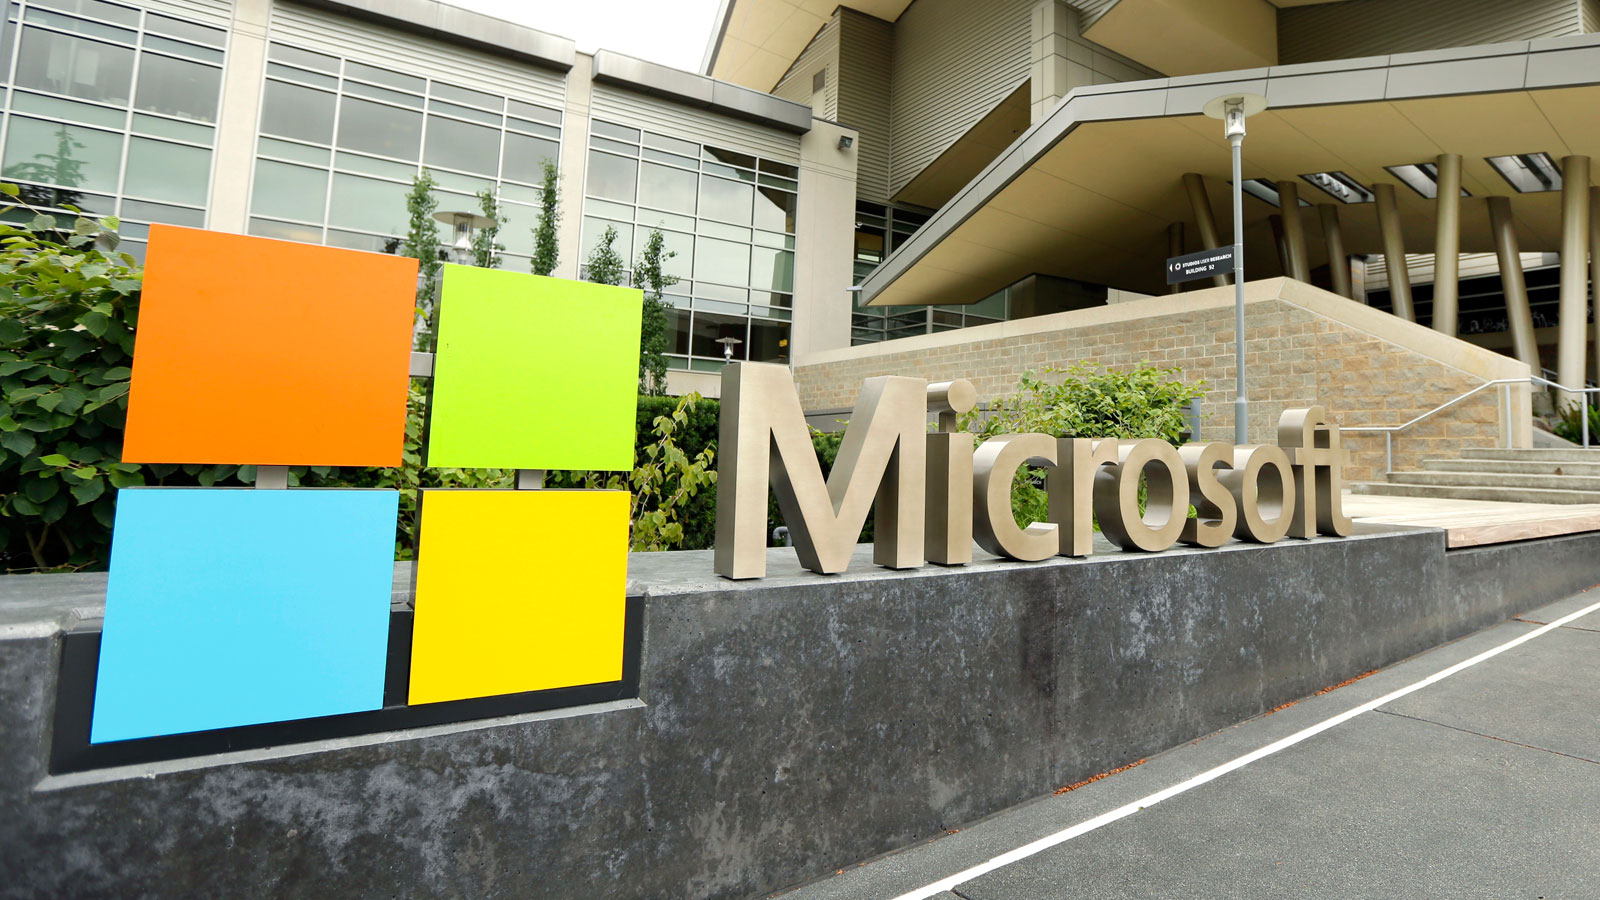 Attorney Mercedes Colwin comments on alleged inappropriate conduct between Microsoft co-founder and an employee